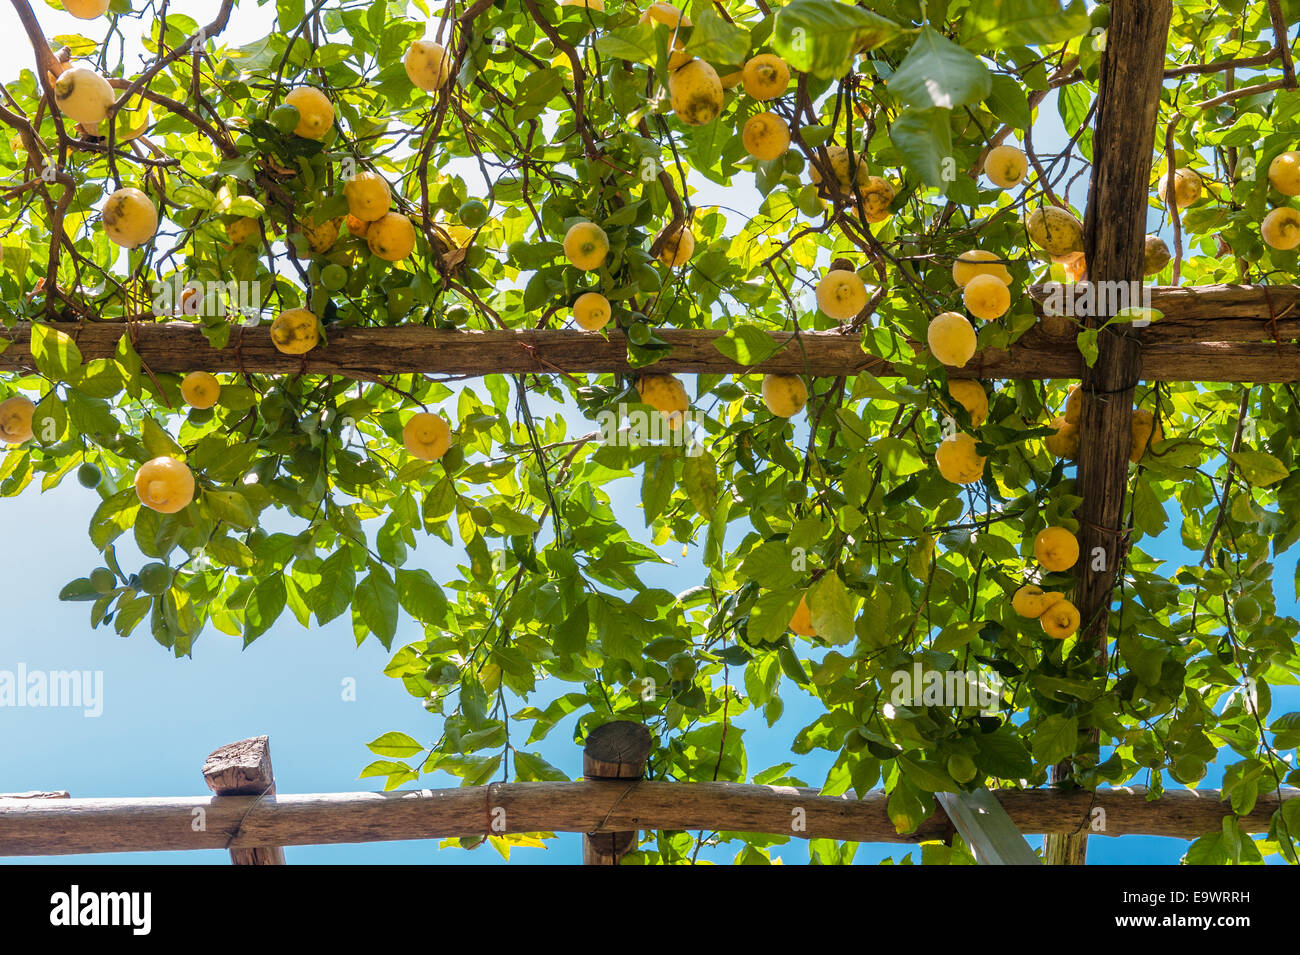 In the famous lemon gardens of Amalfi, Italy. The lemons are traditionally grown on a framework of chestnut poles Stock Photo